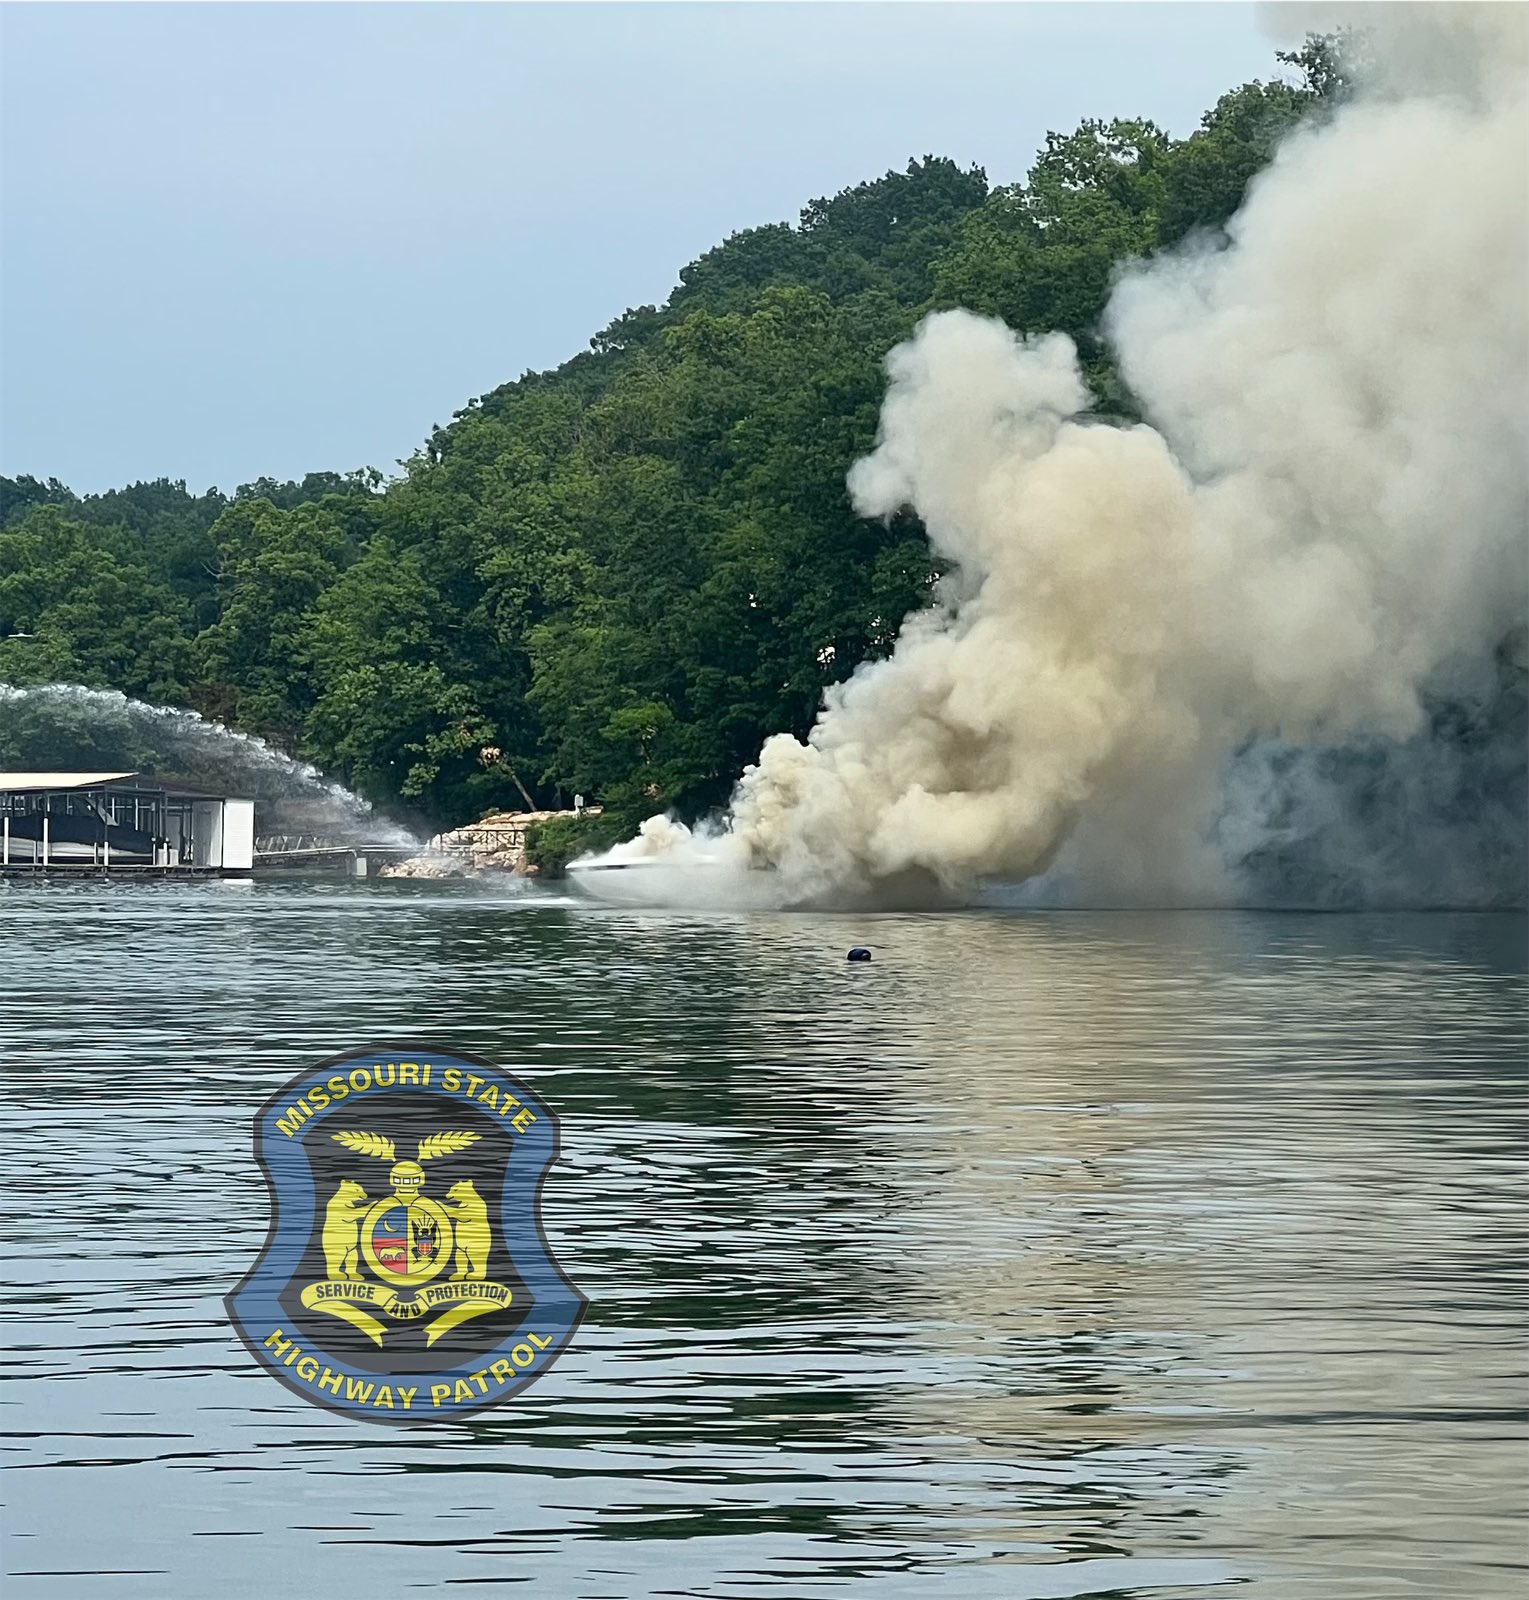 UPDATE: Woman seriously injured in boat explosion and fire